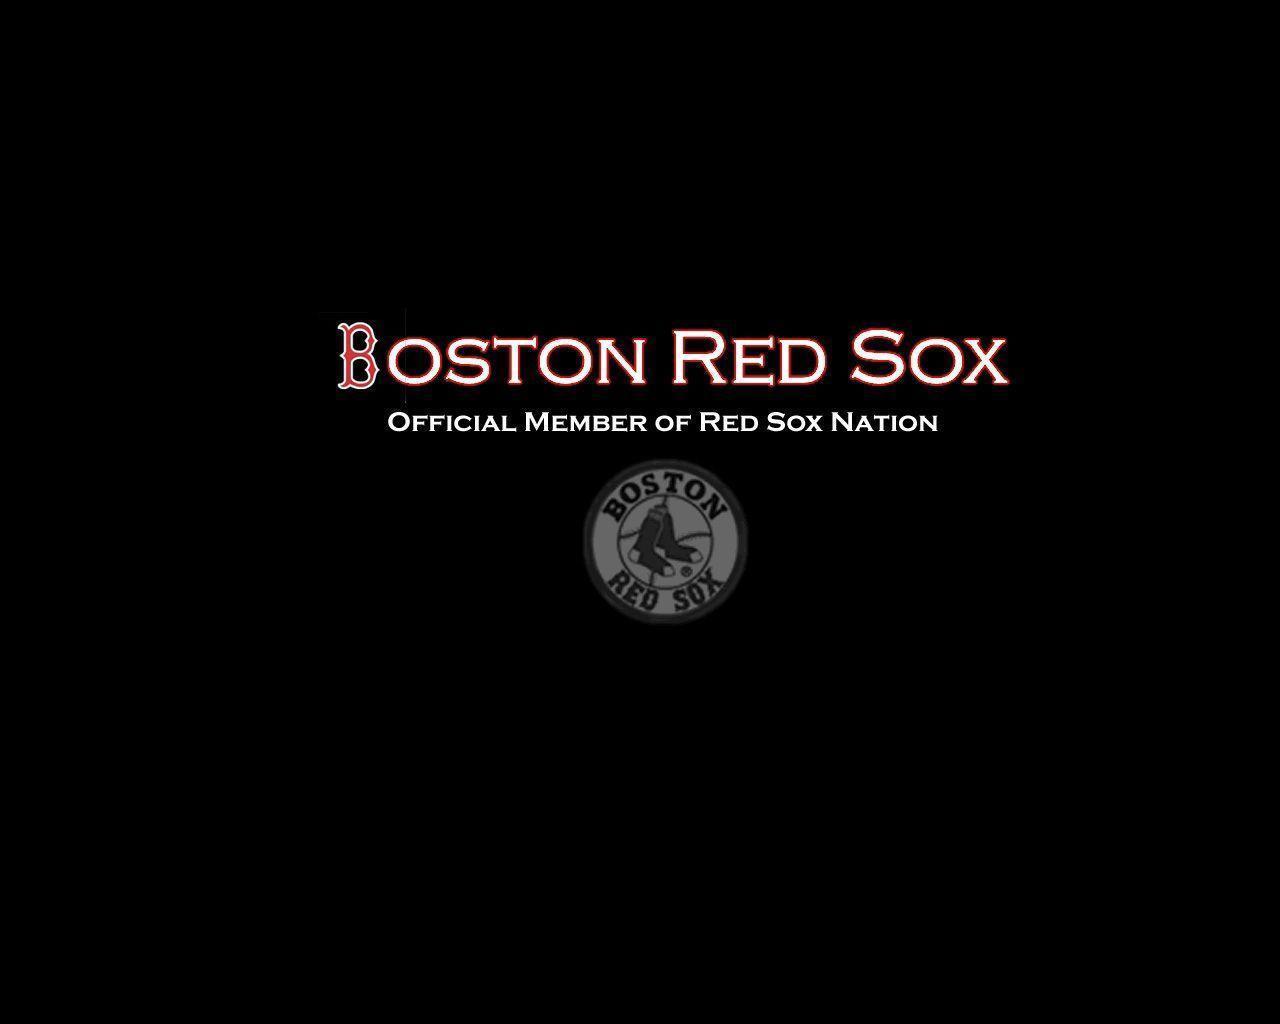 Boston Red Sox wallpaper. Boston Red Sox background